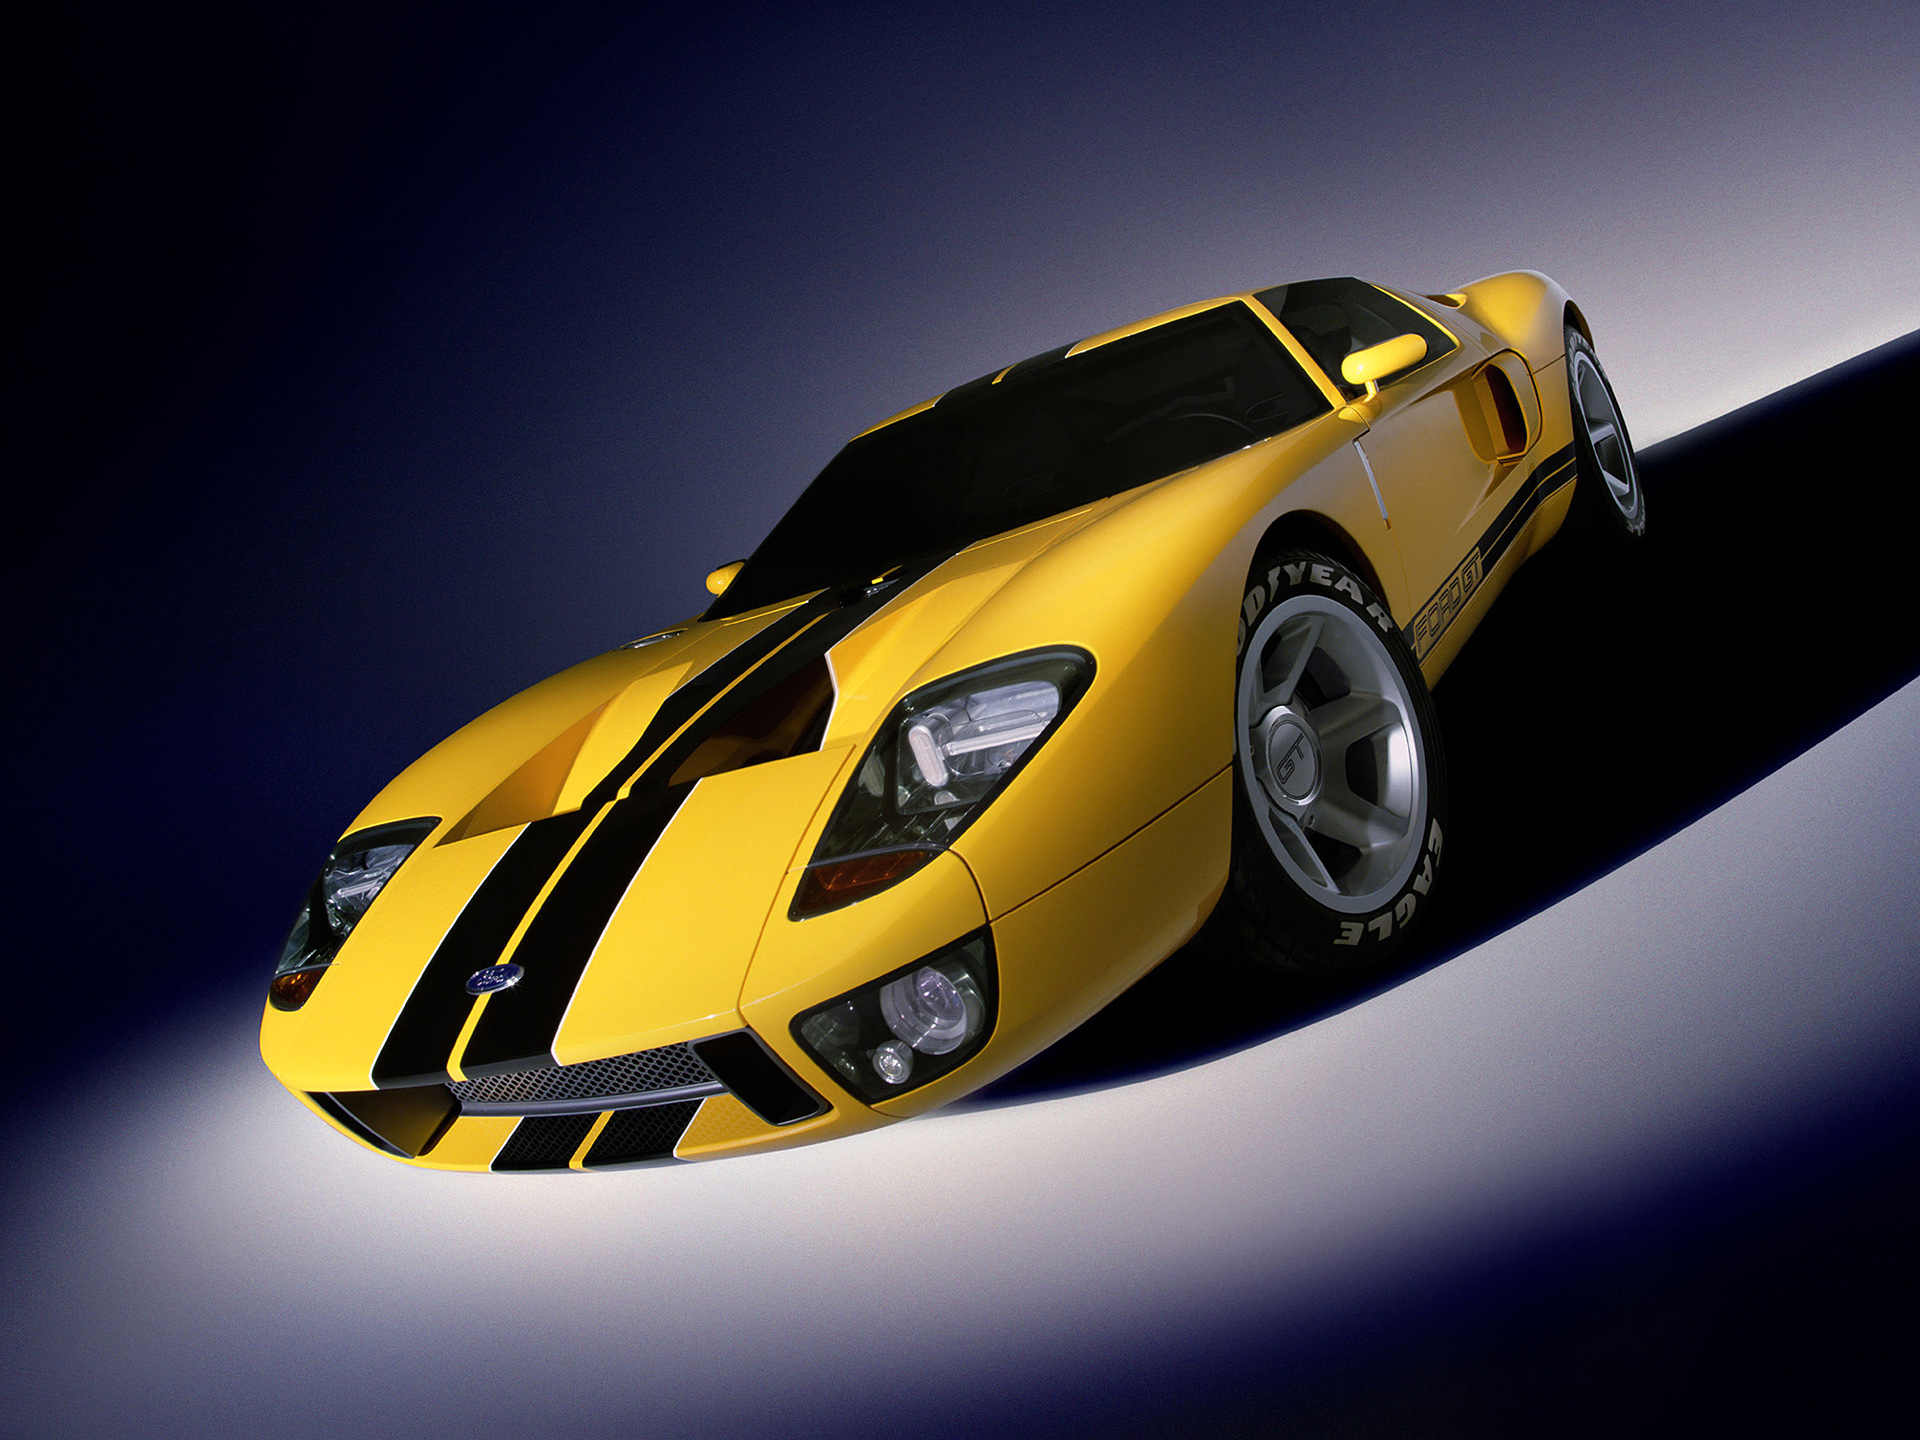  2002 Ford GT40 Concept Wallpaper.